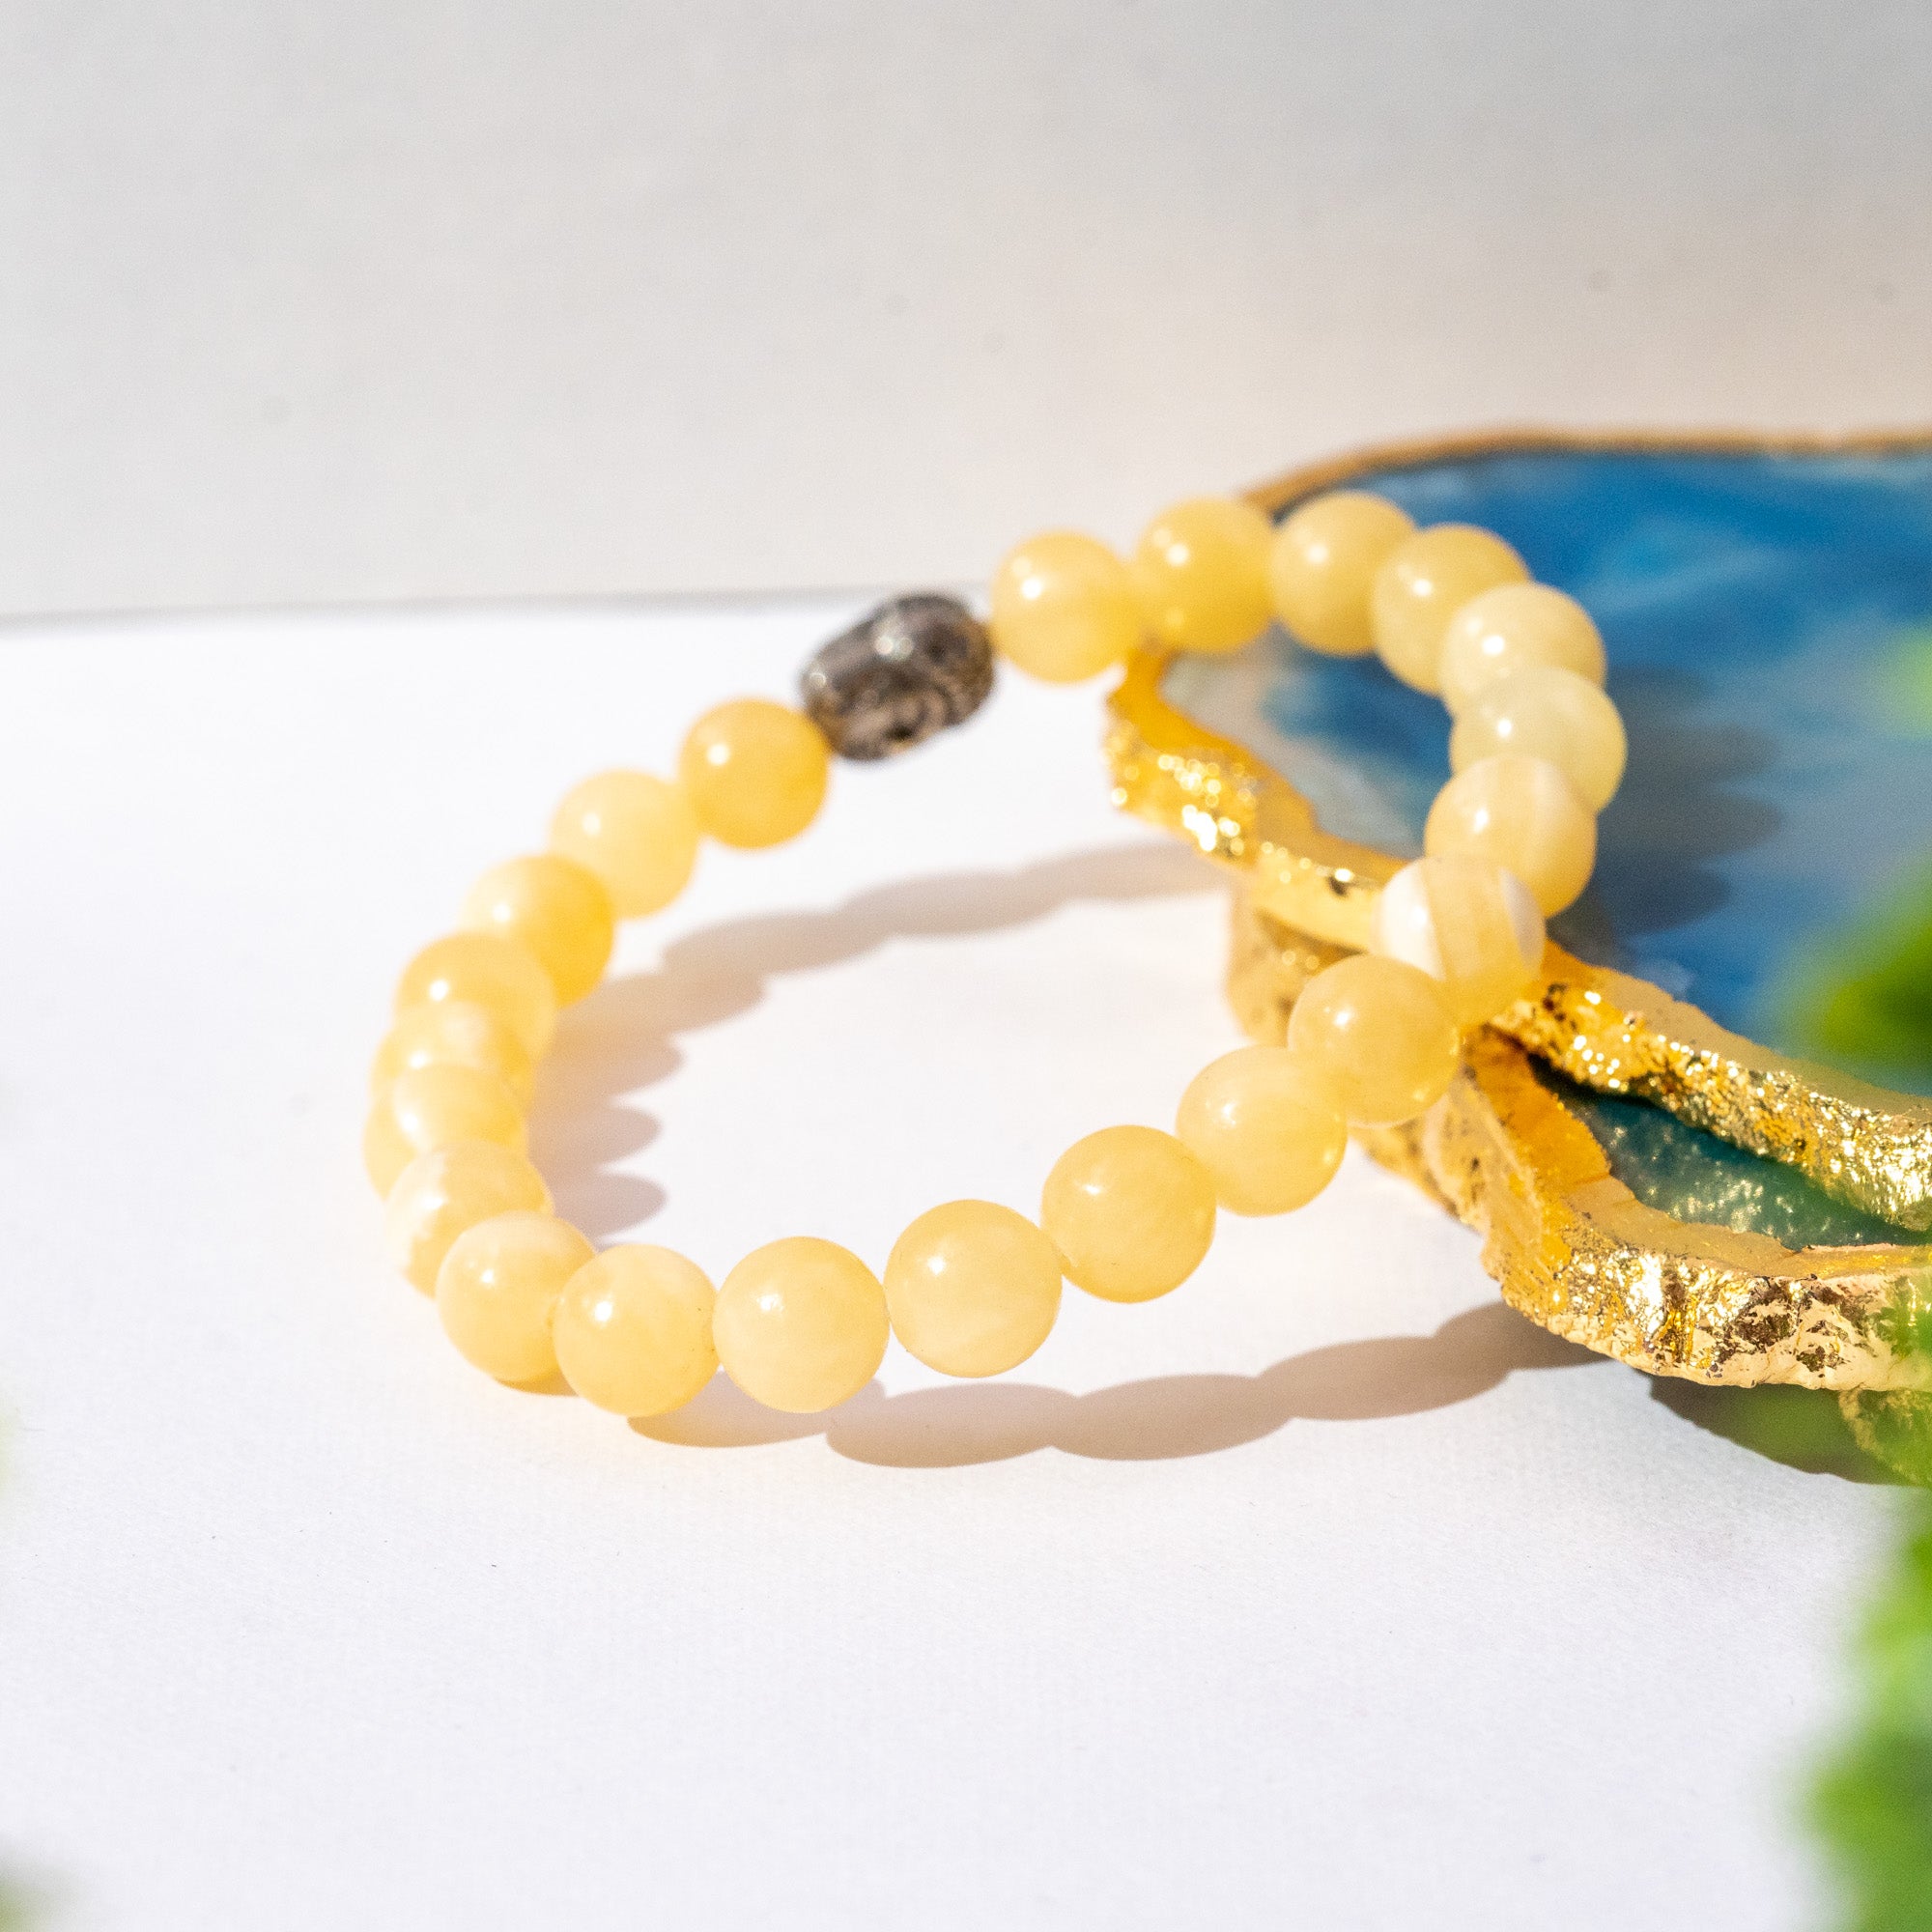 Bead Bracelet: A Fashionable Accessory for Every Occasion